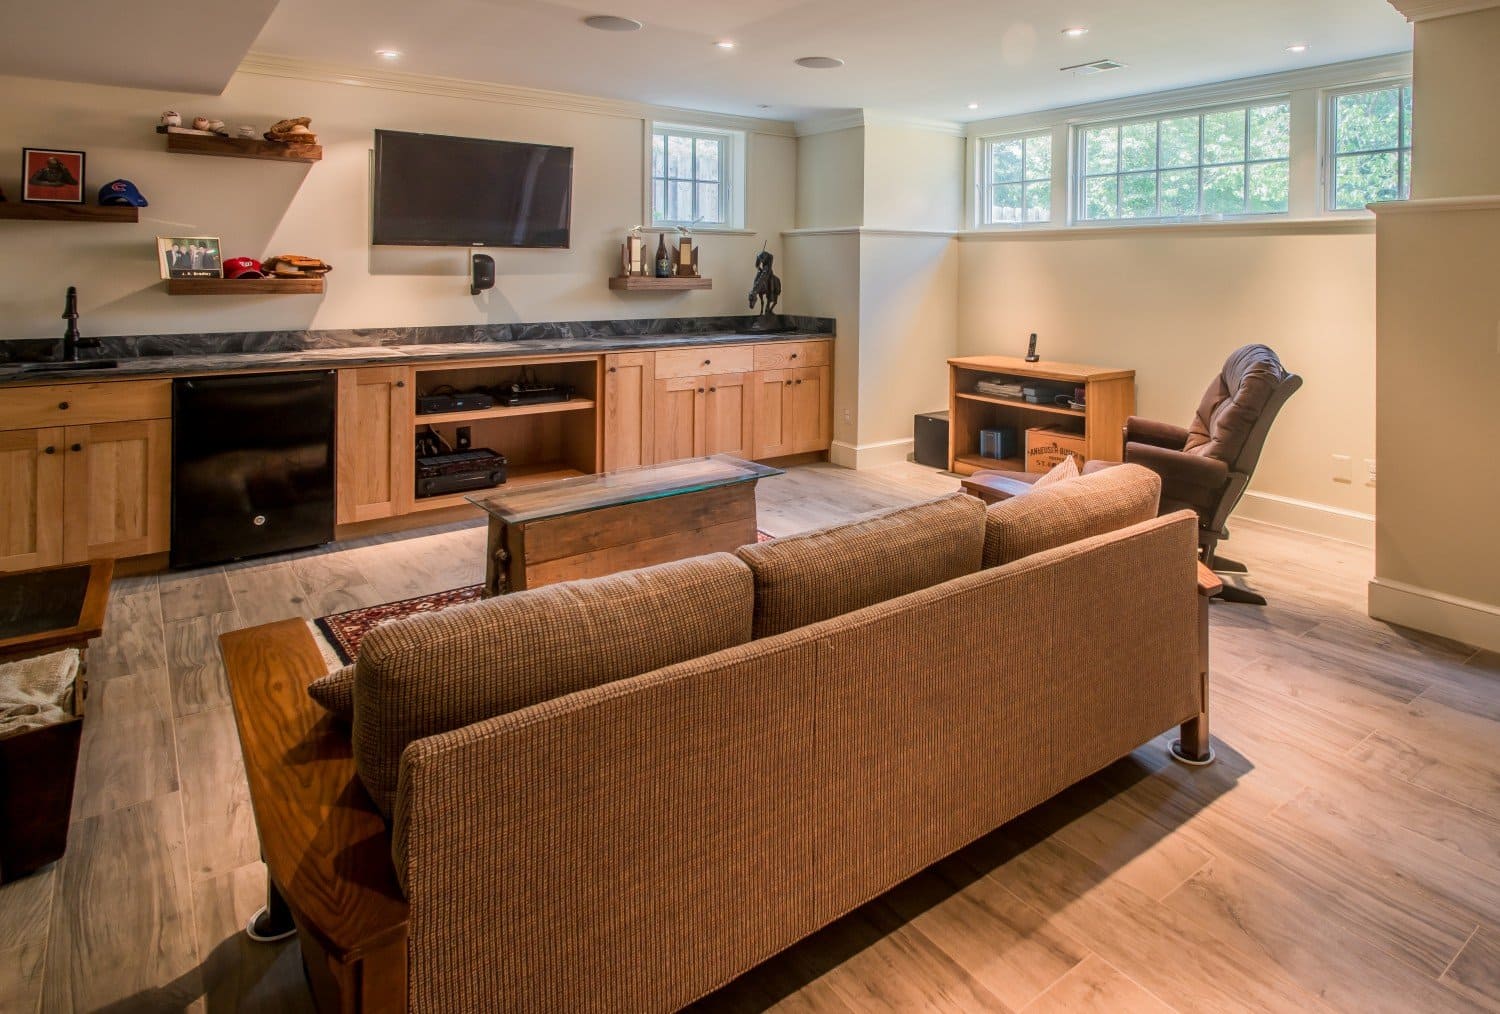 Basement Remodel Project Brings Basement Den Idea to Life with Natural LIght and Custom Built In TV Wall | Denny + Gardner Basement Remodeling Services